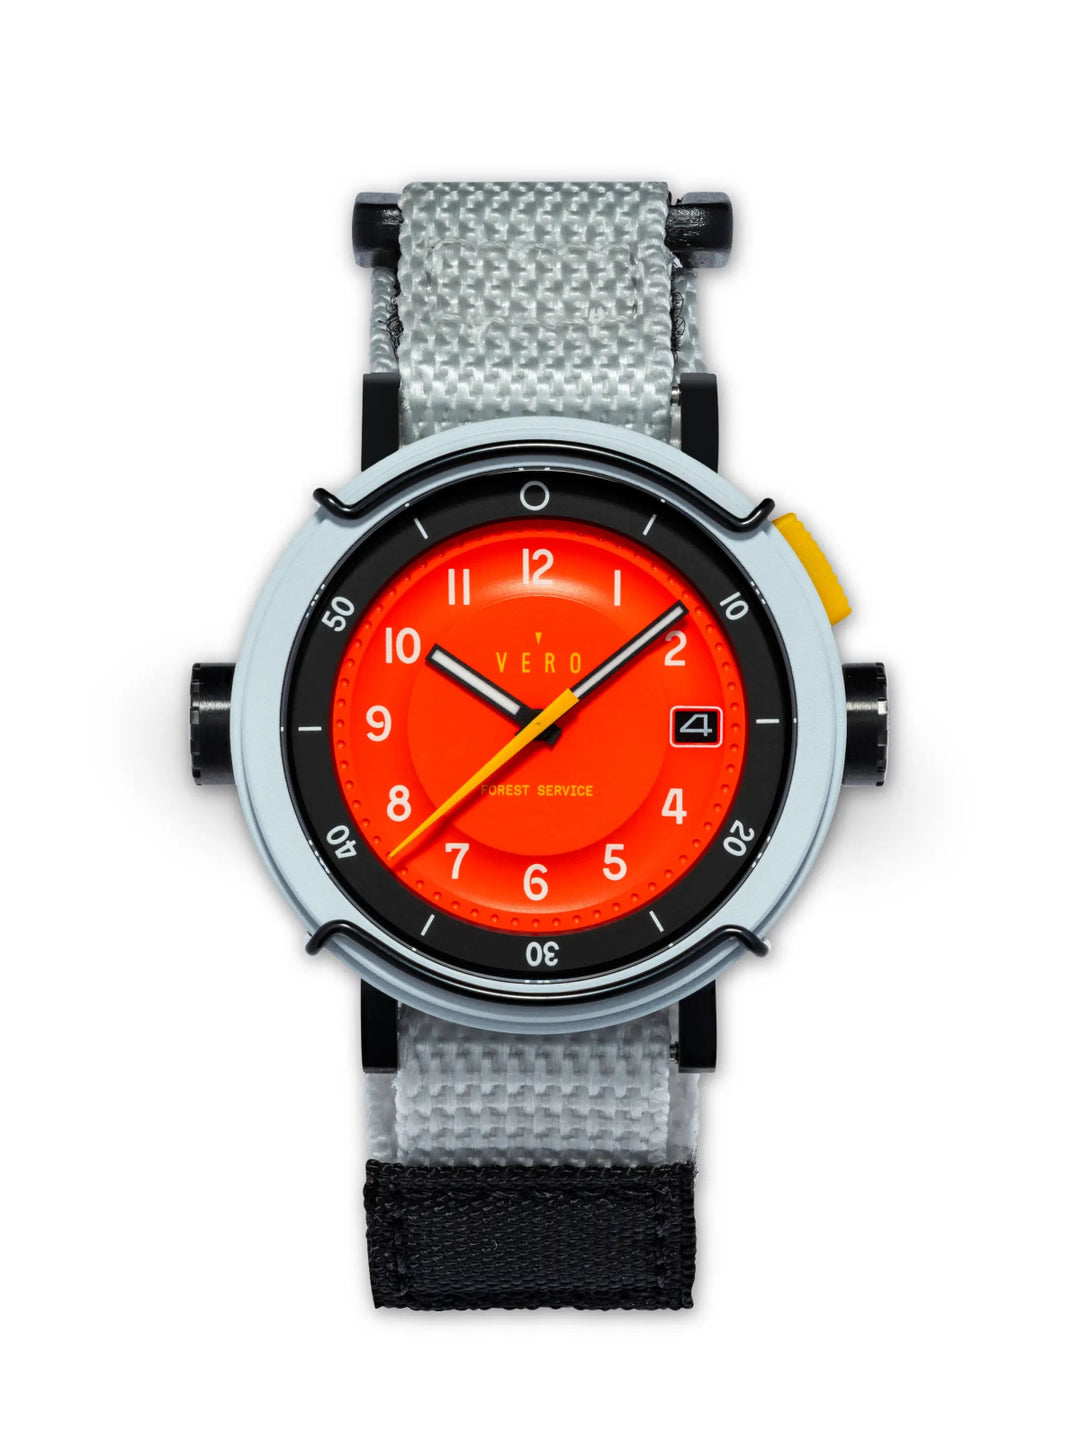 Forest Service Edition Airtanker - VERO Watch Company